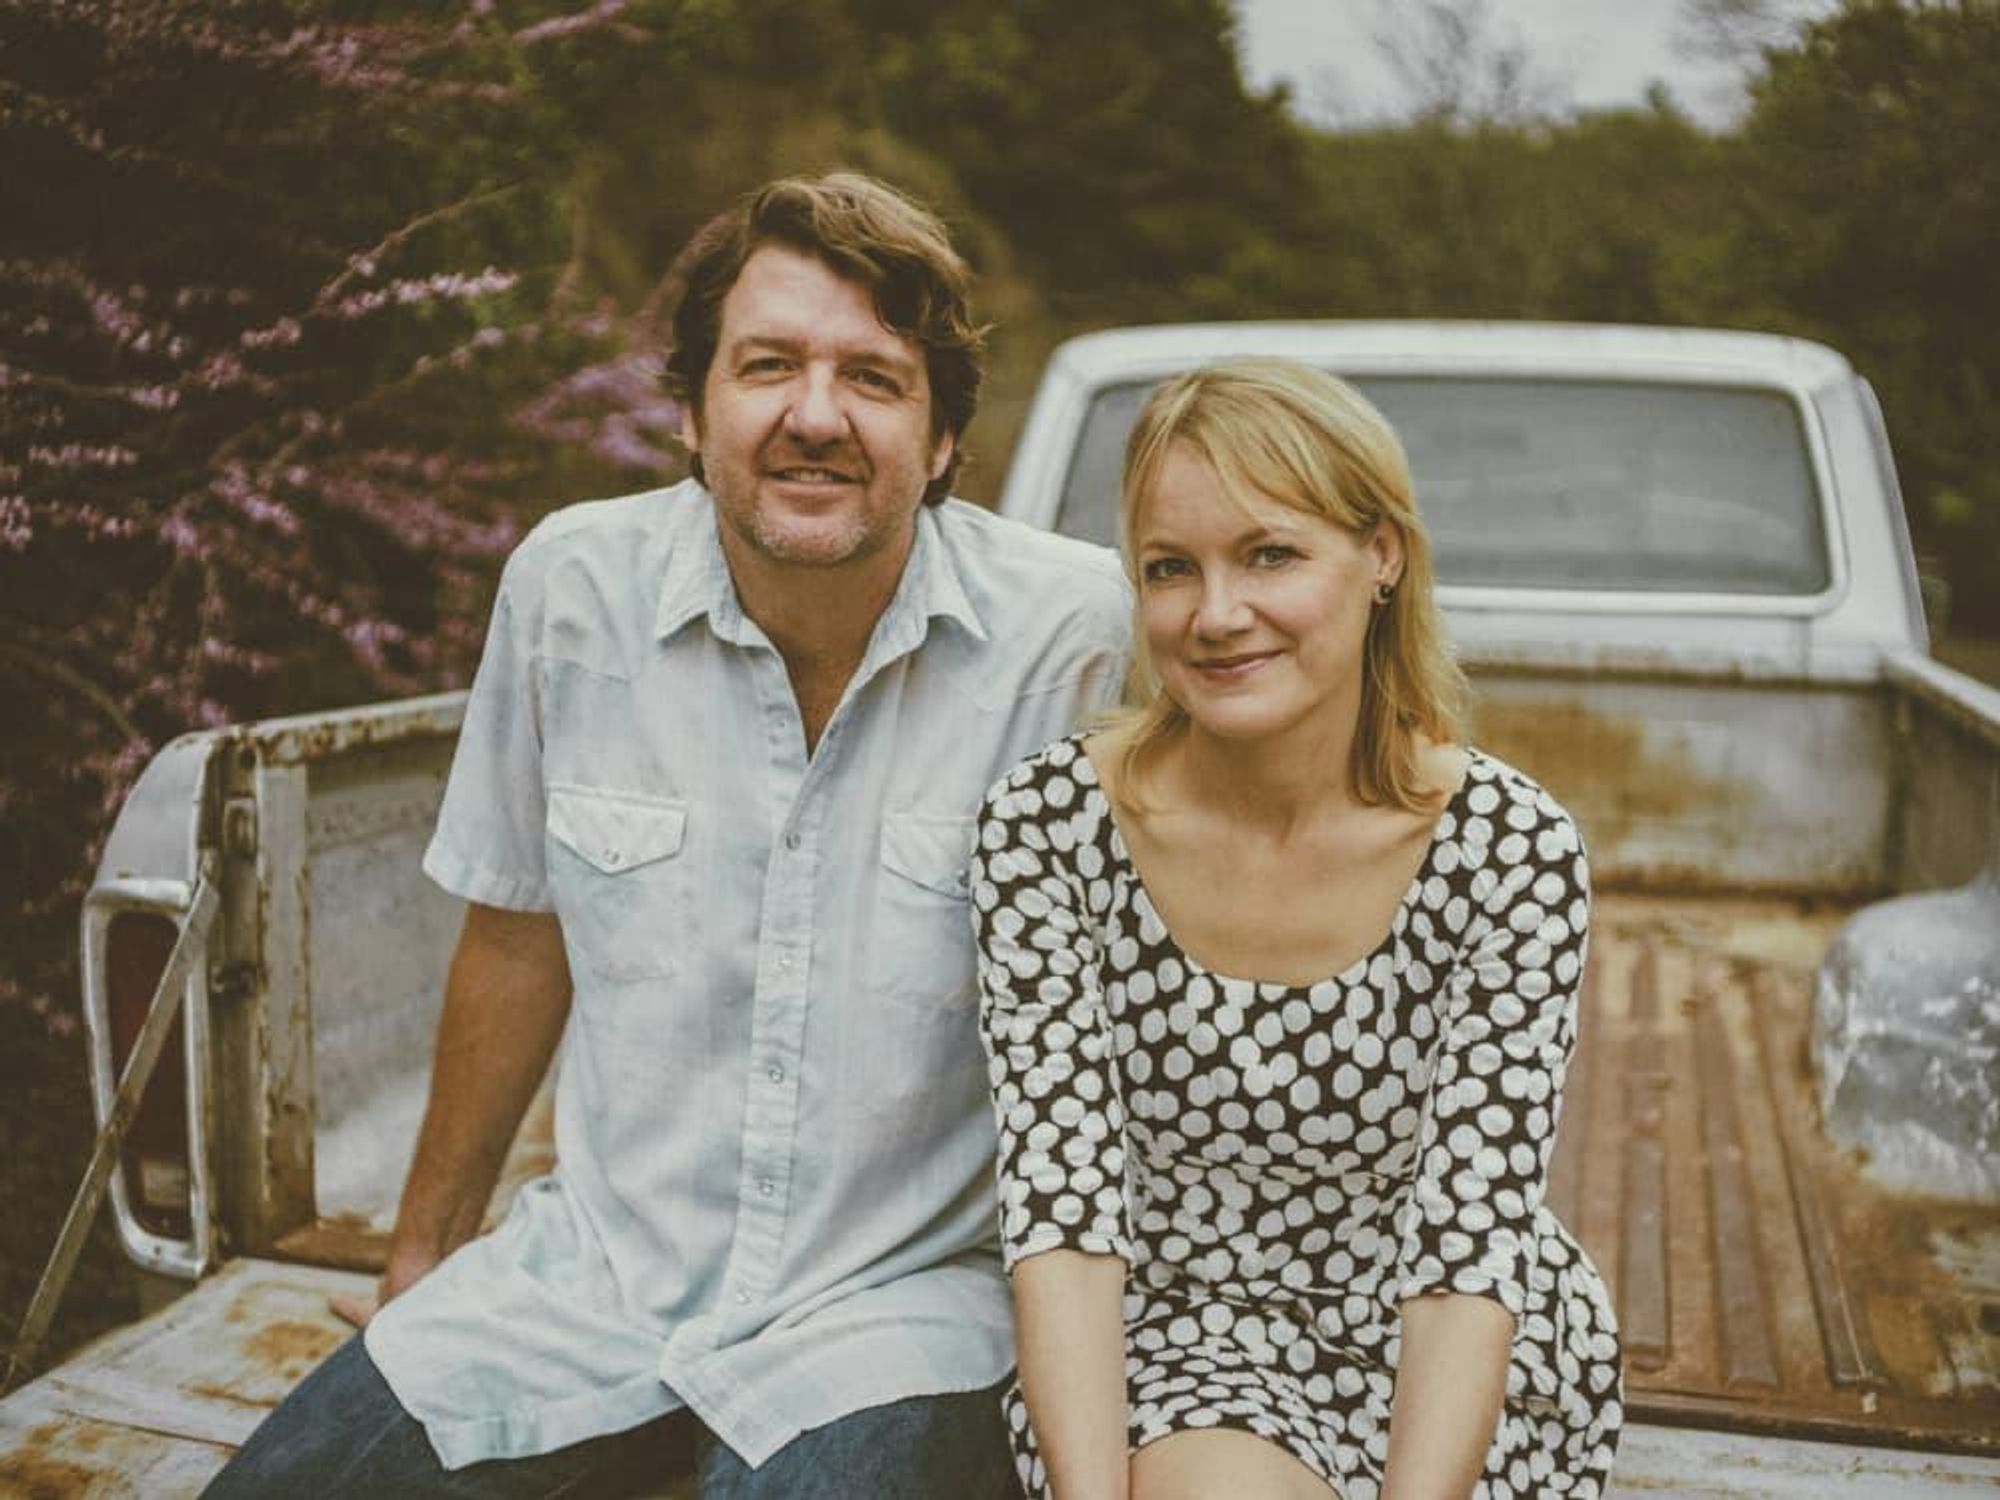 Bruce Robison and Kelly Willis